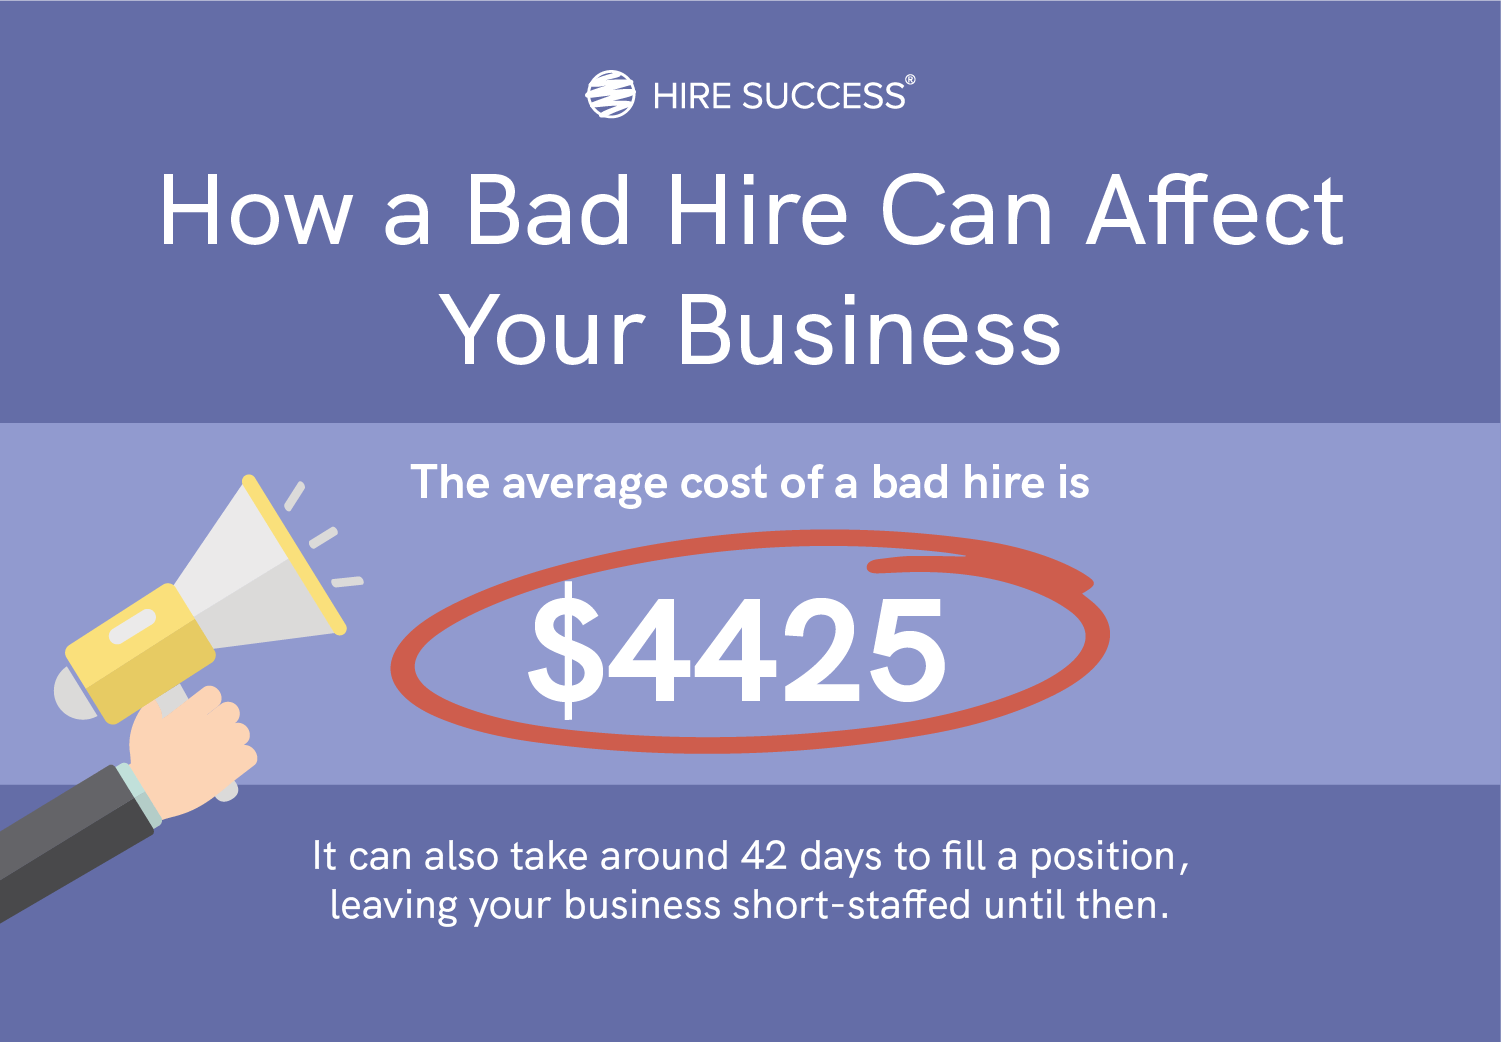 How a bad hire can affect your business